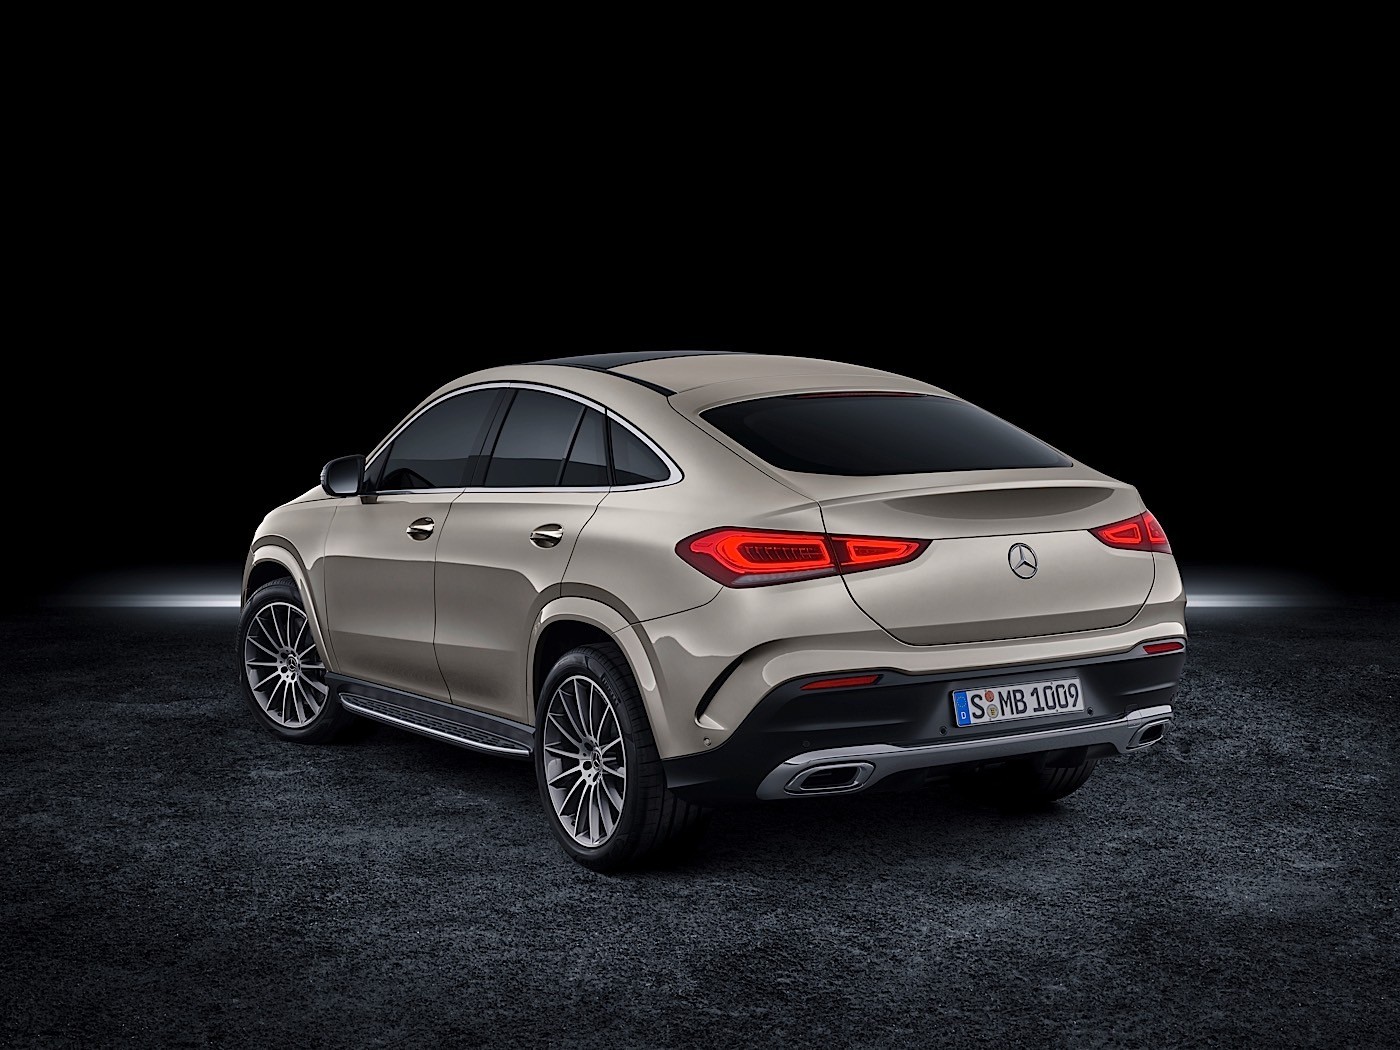 2020 MercedesBenz GLE Coupe is Larger But Sleeker